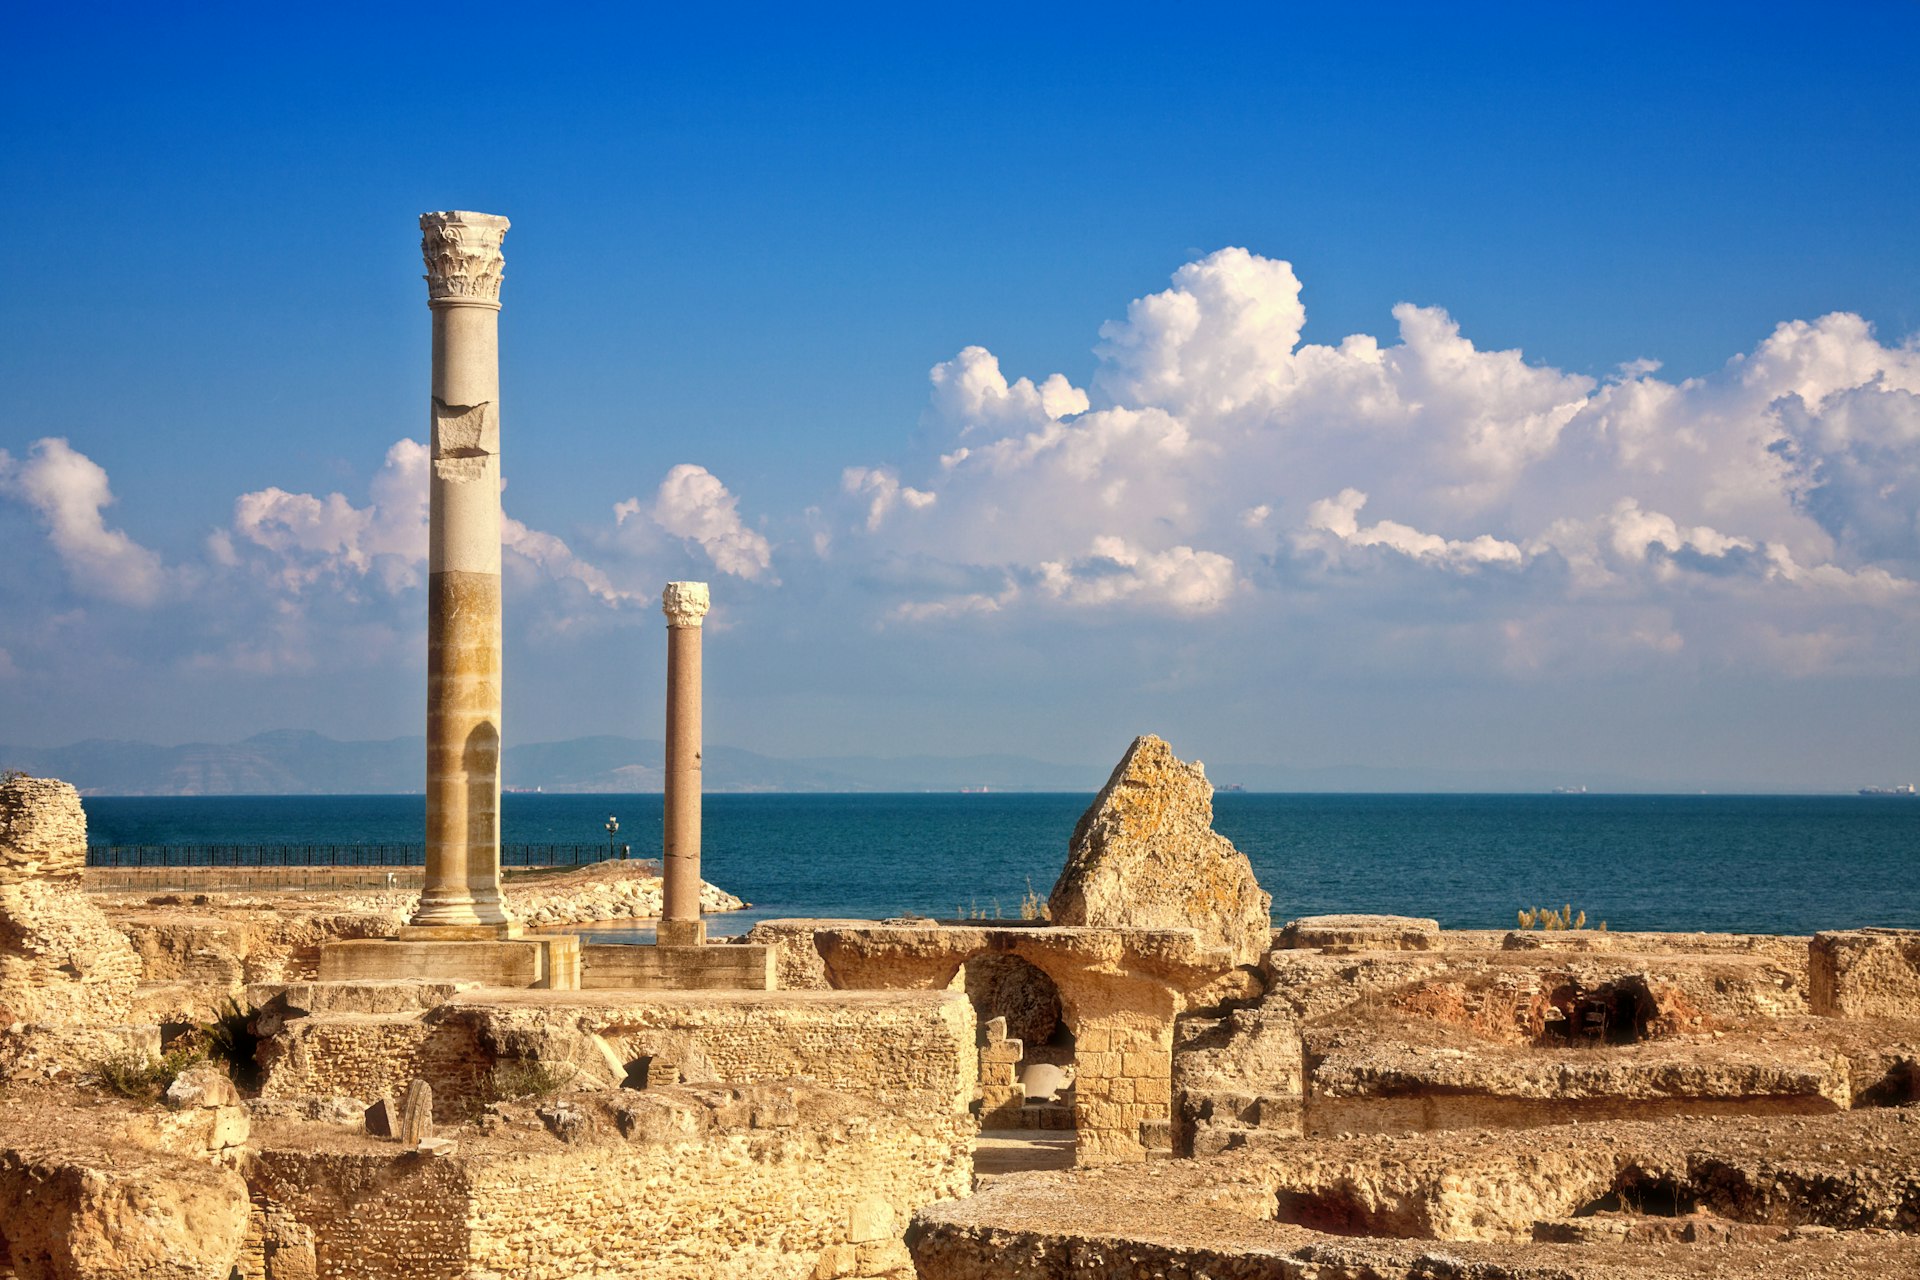 Ruins, dominated by a free-standing chimney-like structure. The blue sea stretches out in the distance